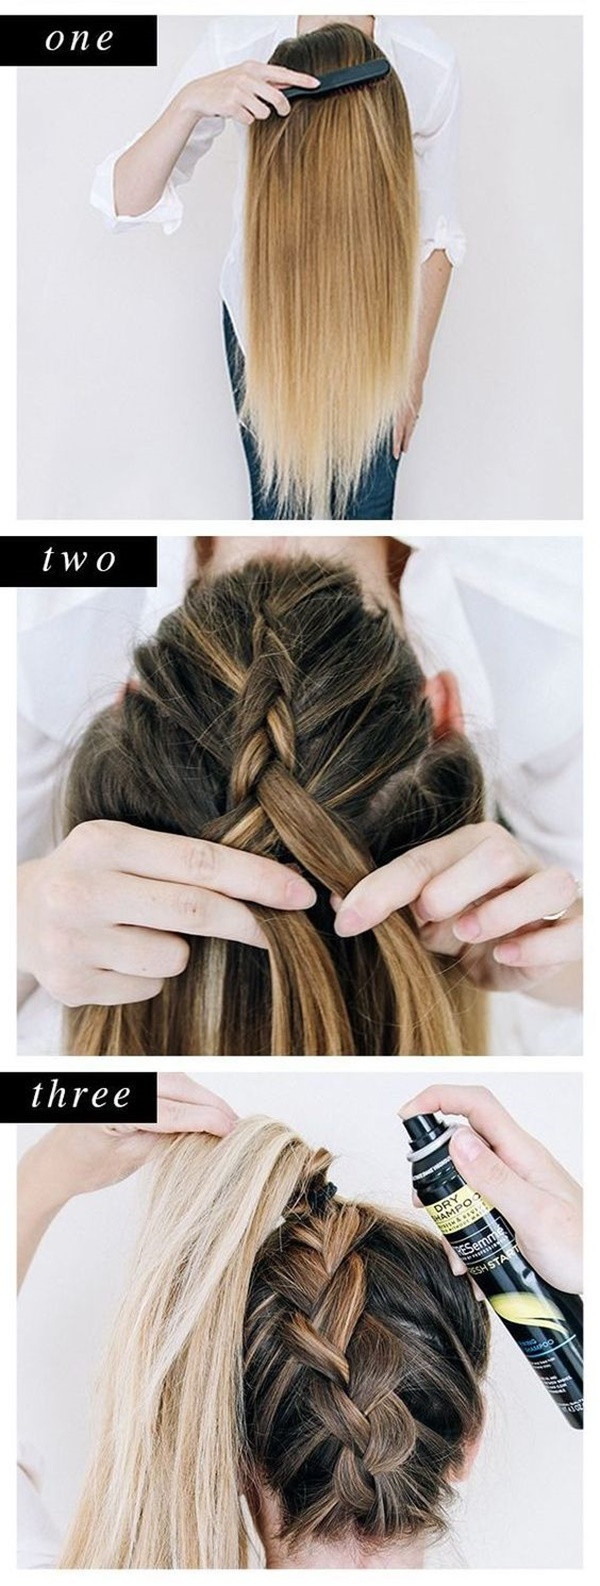 Girls Updo Hairstyles
 40 Easy Step By Step Hairstyles For Girls